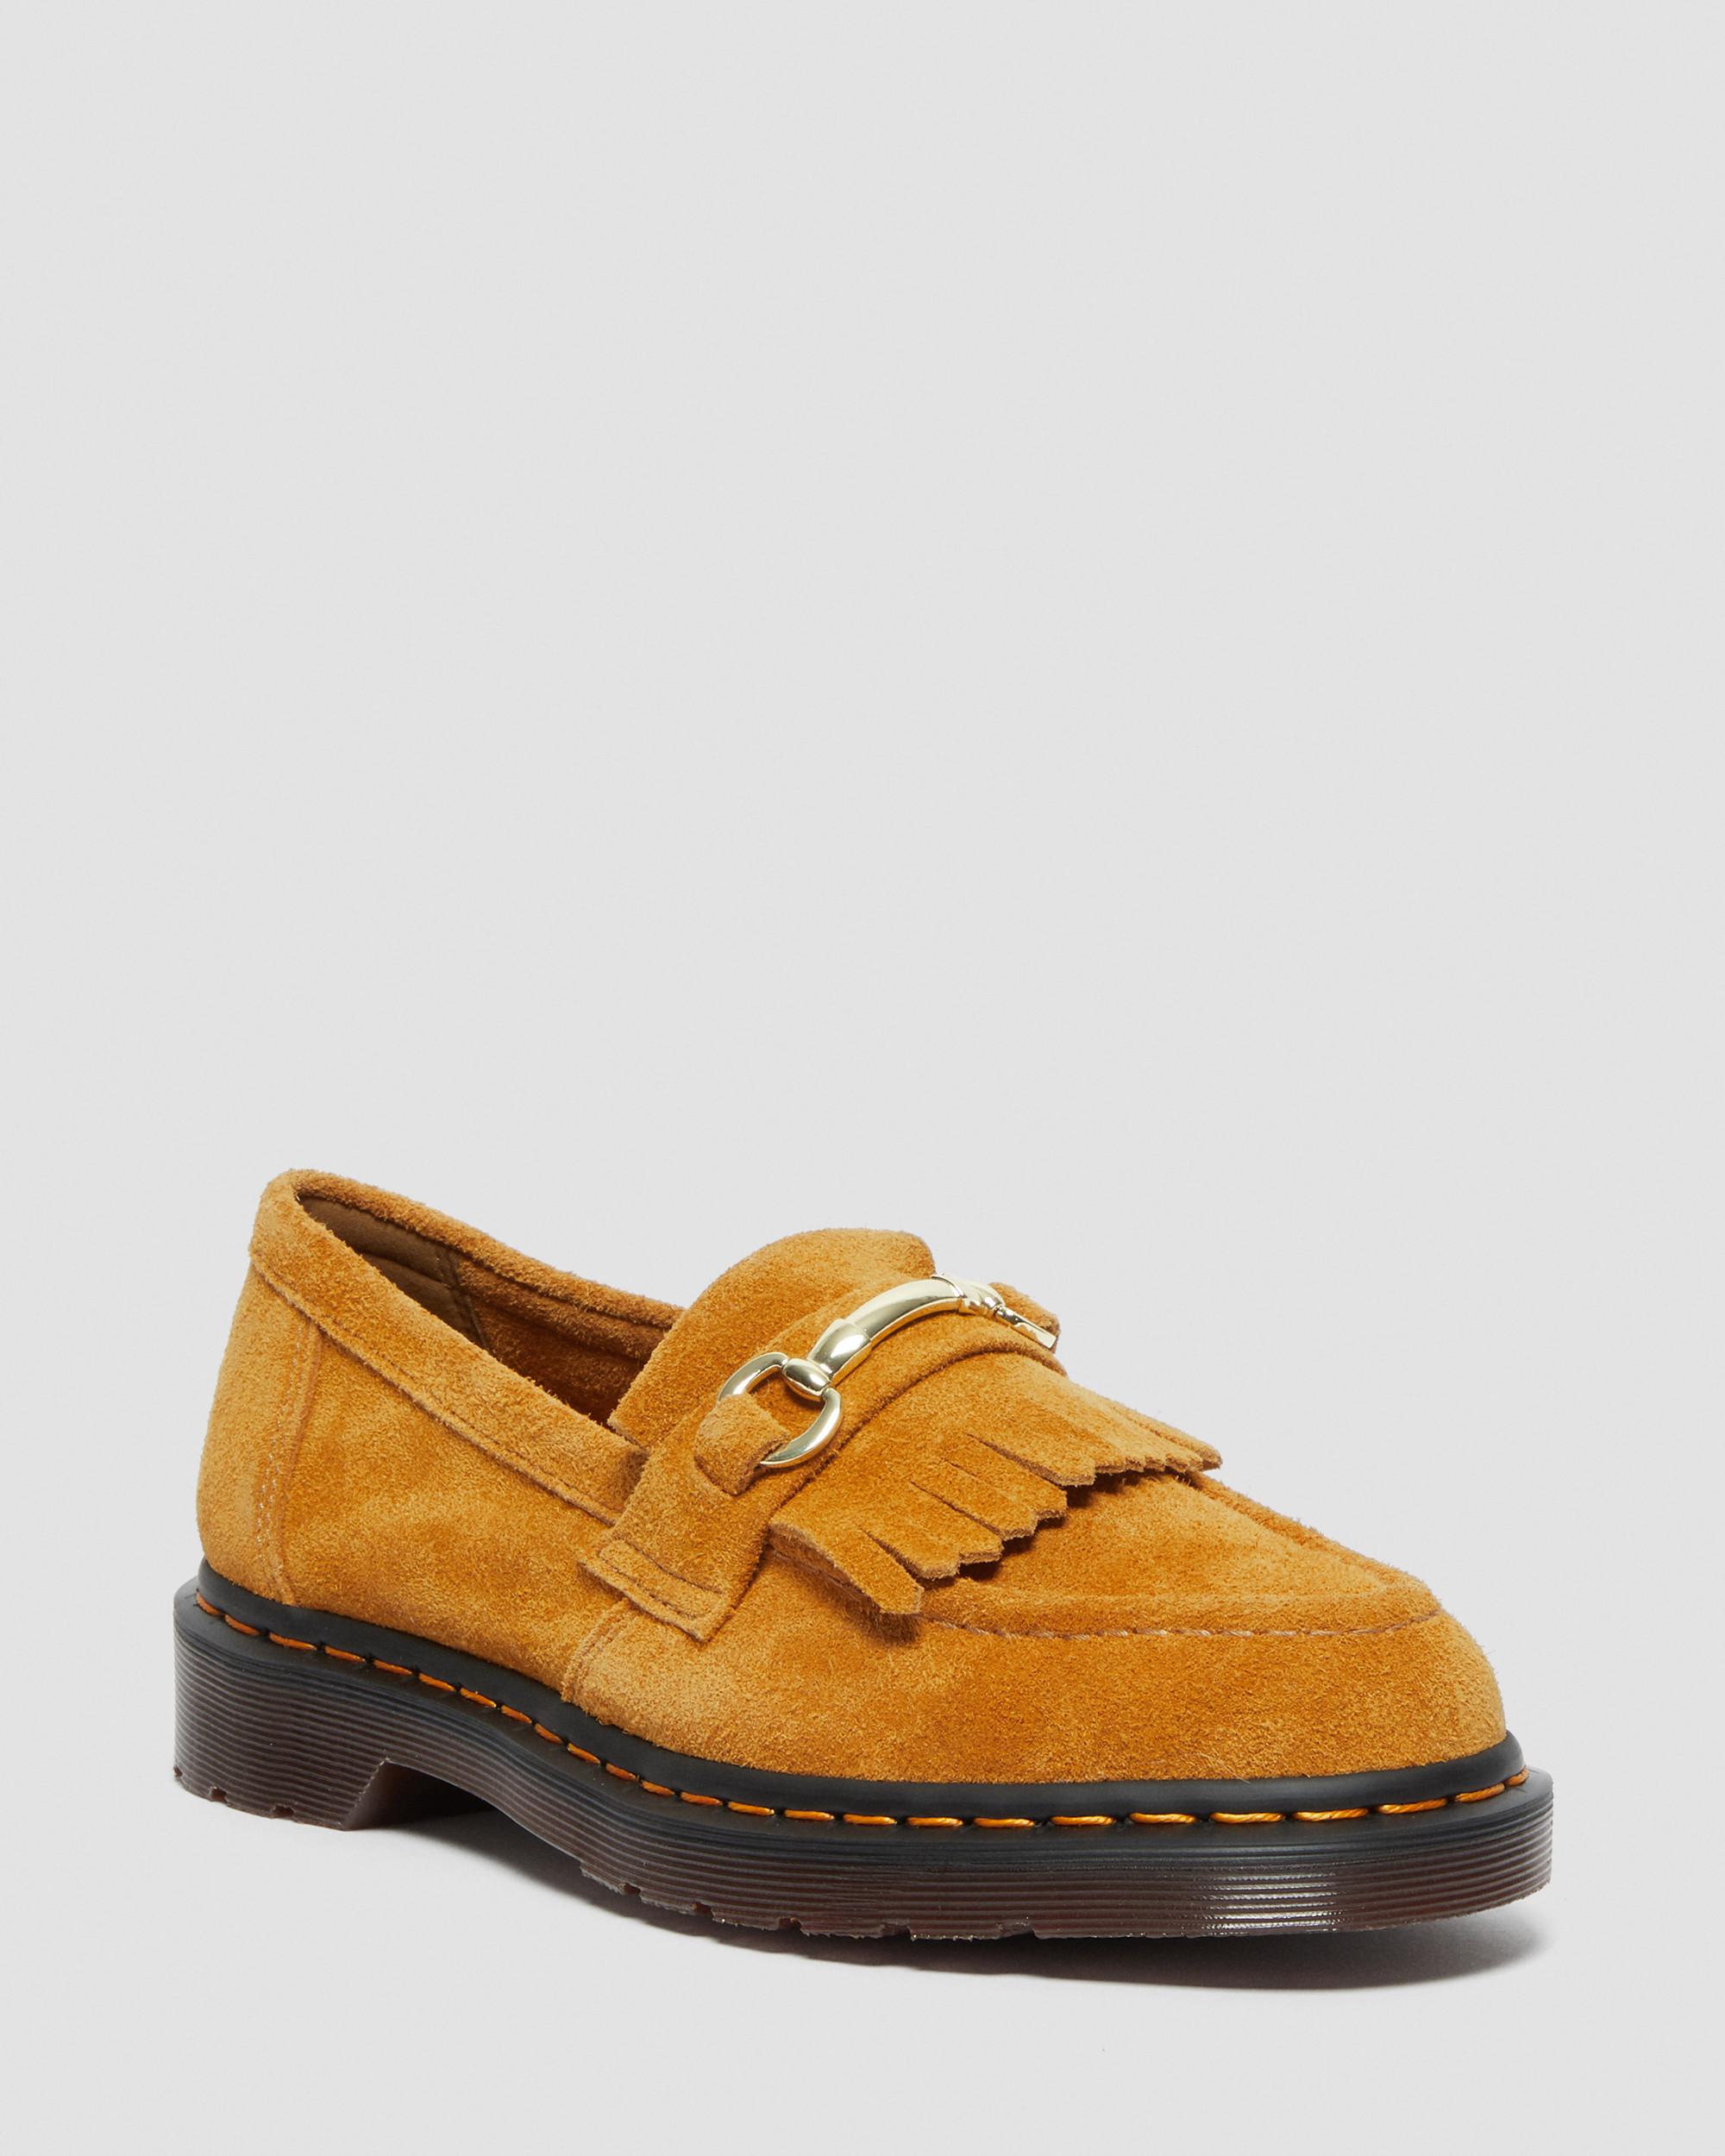 Adrian Snaffle Suede Loafers in Tan | Dr. Martens